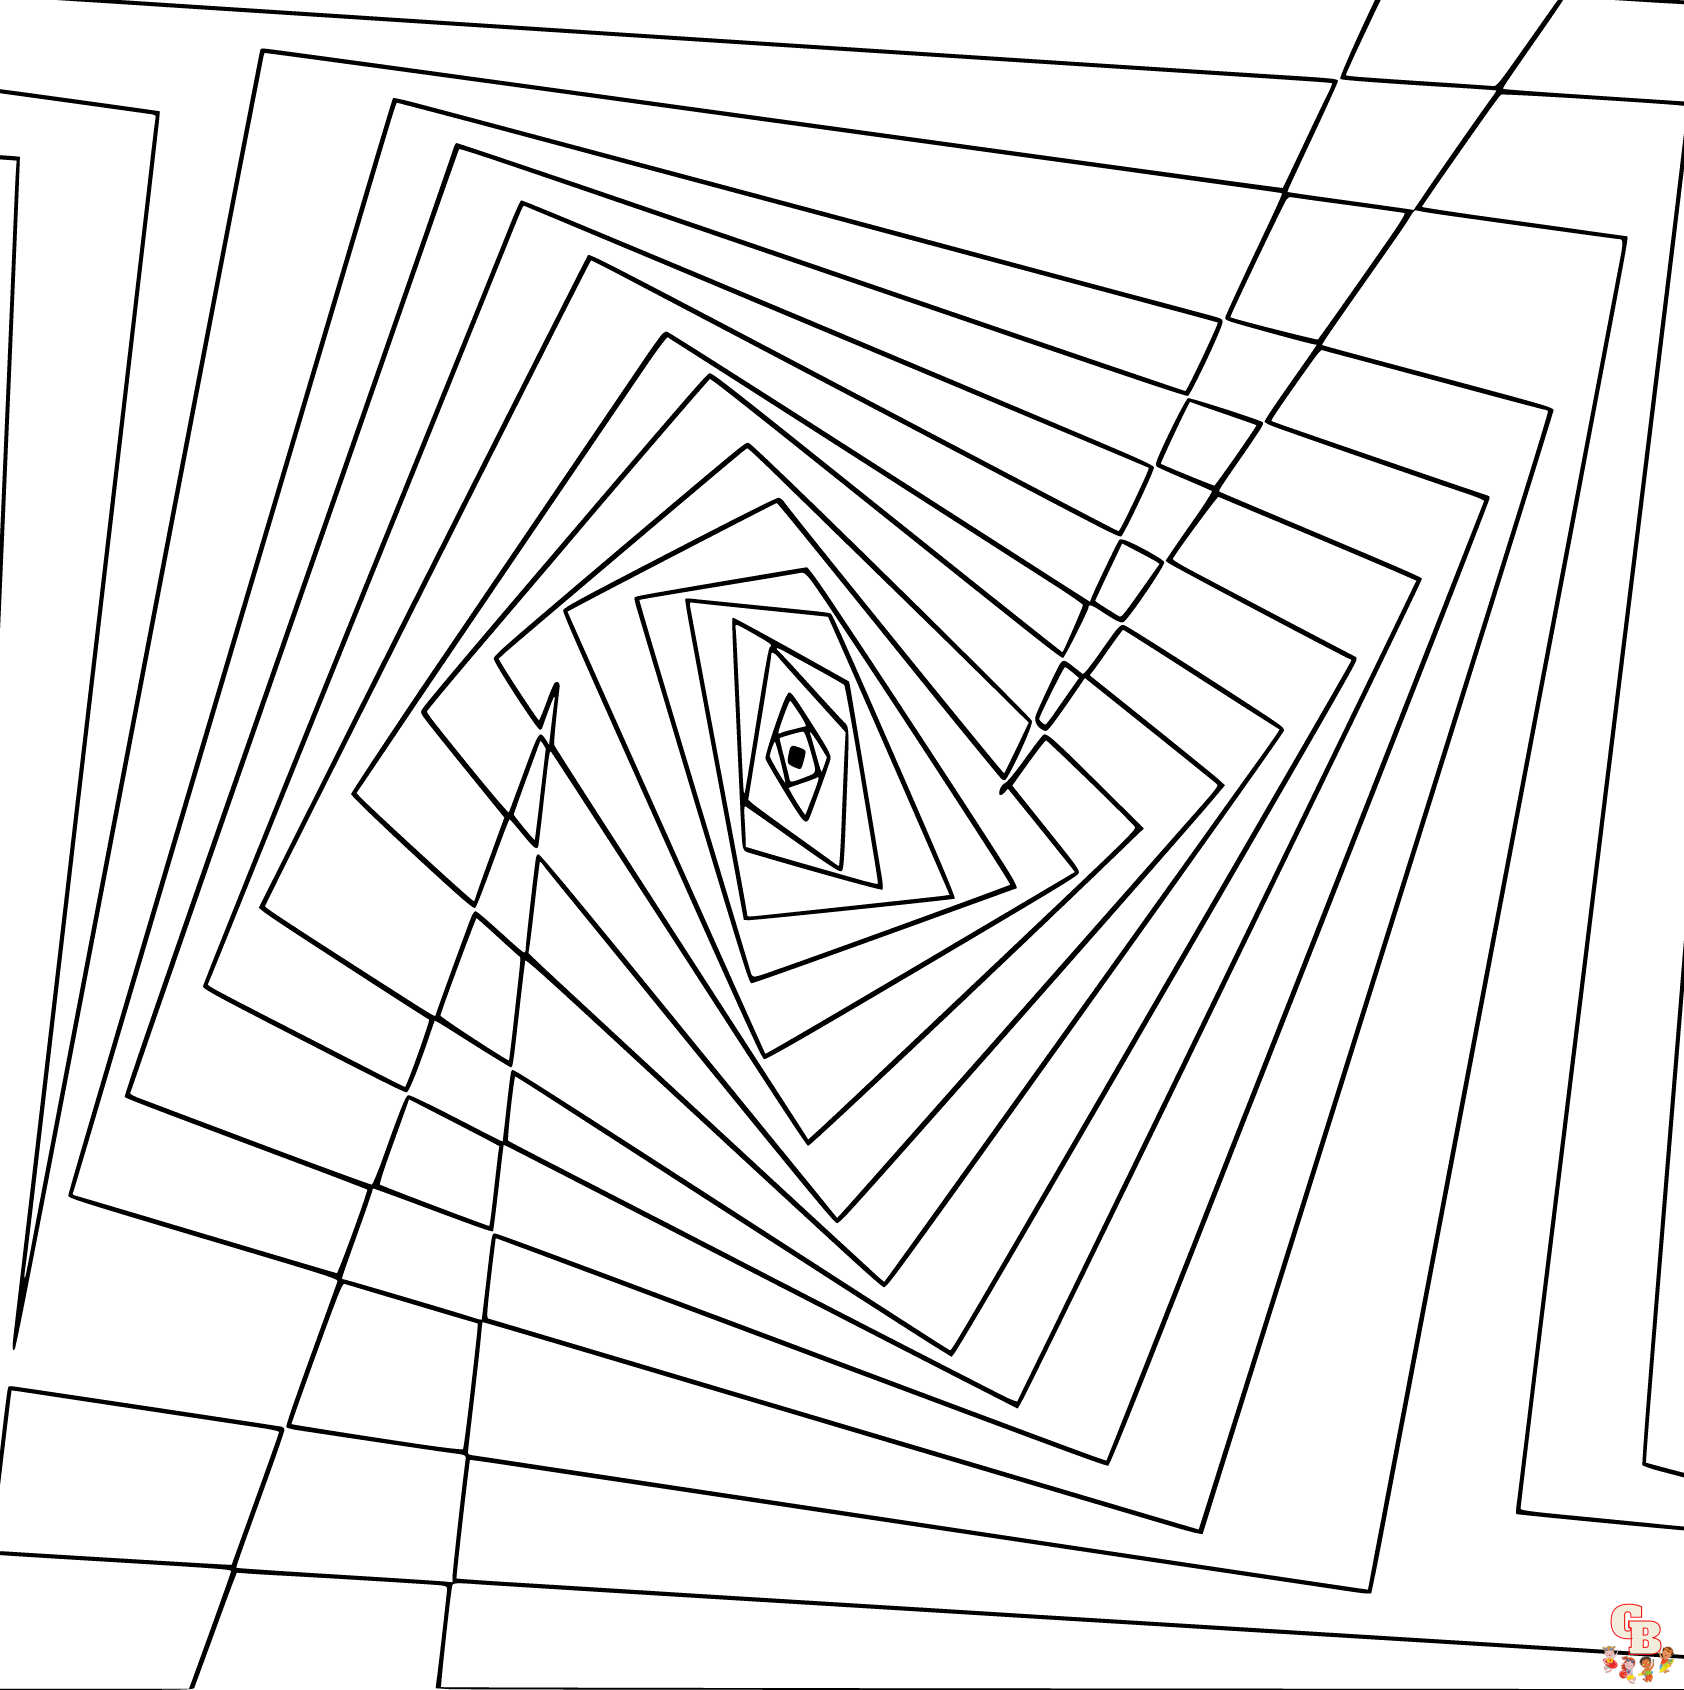 Printable optical illusion coloring pages free for kids and adults